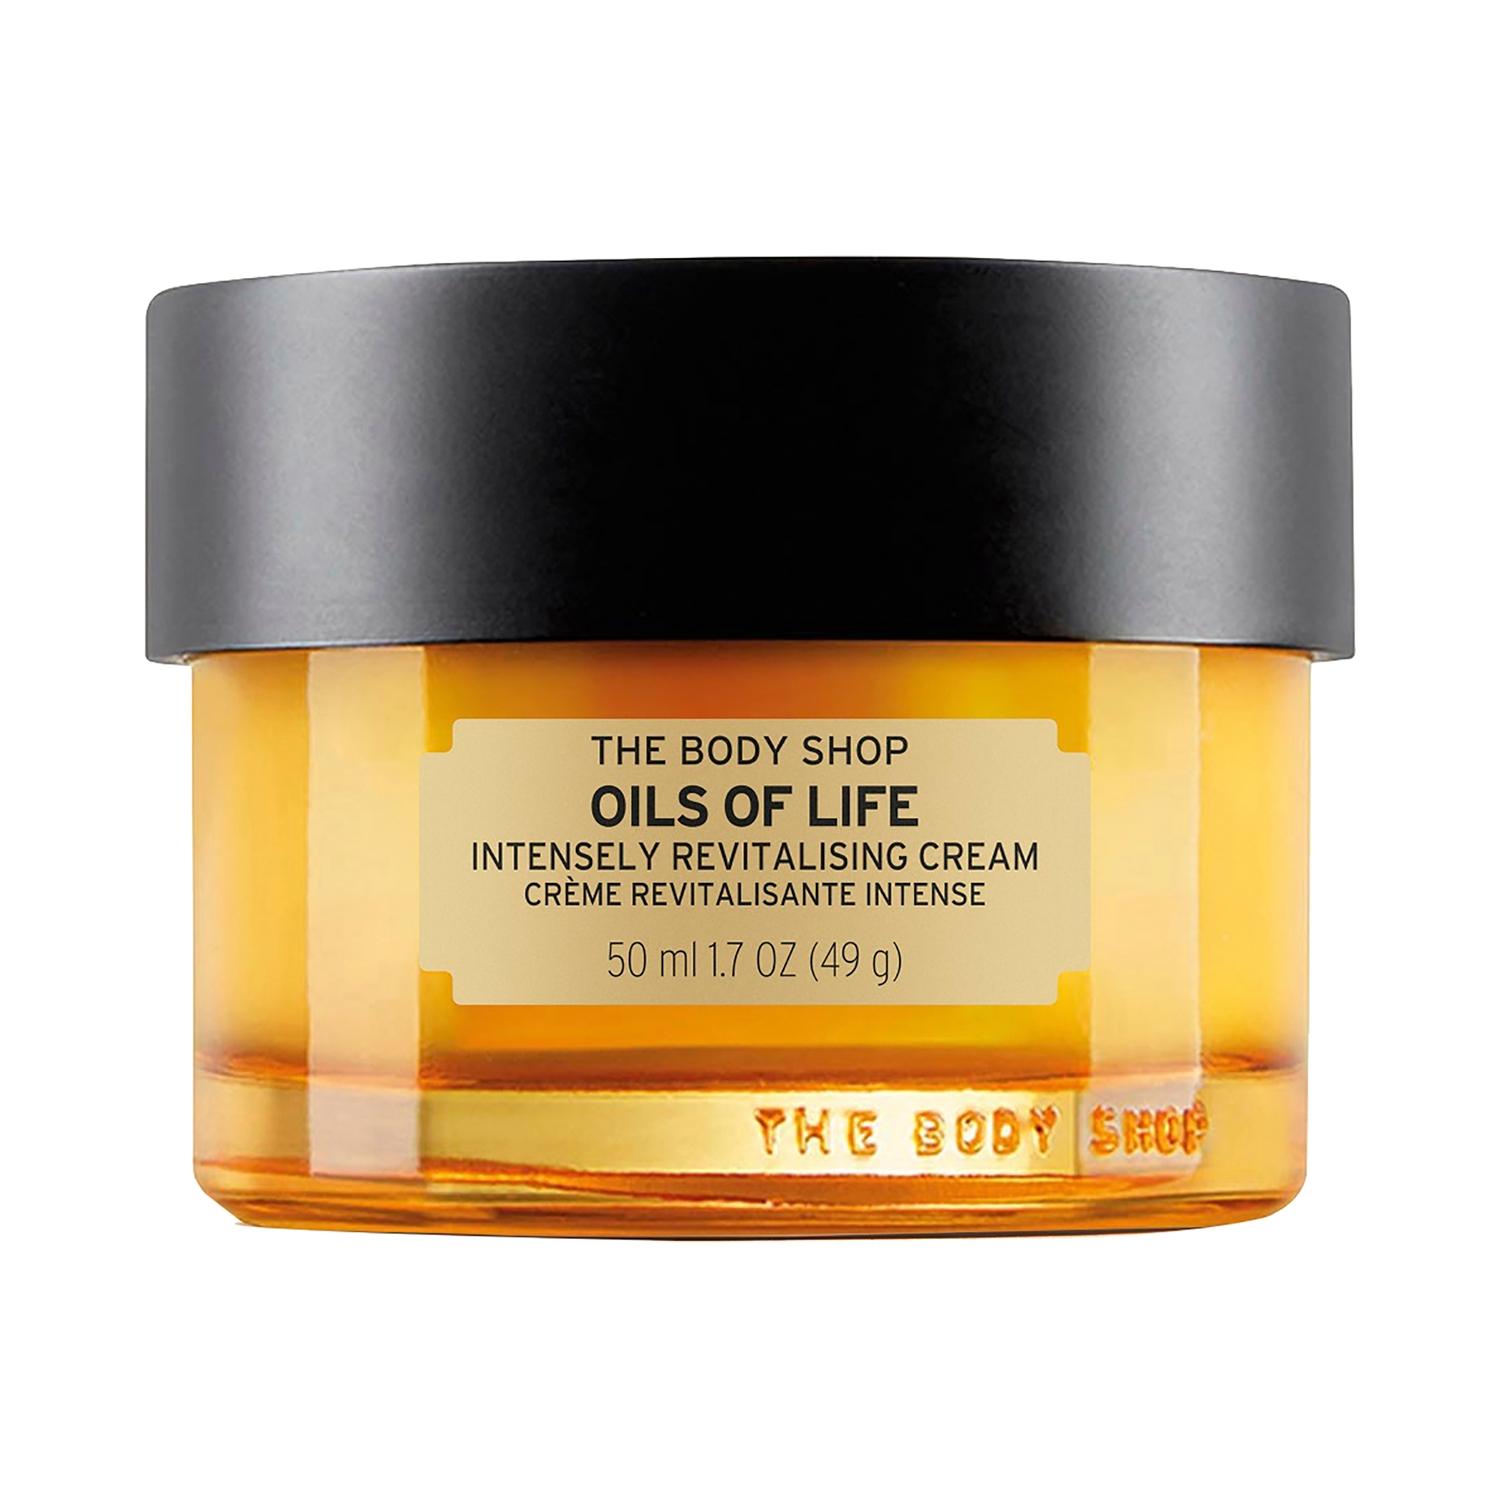 the body shop oils of life intensely revitalizing cream (50ml)